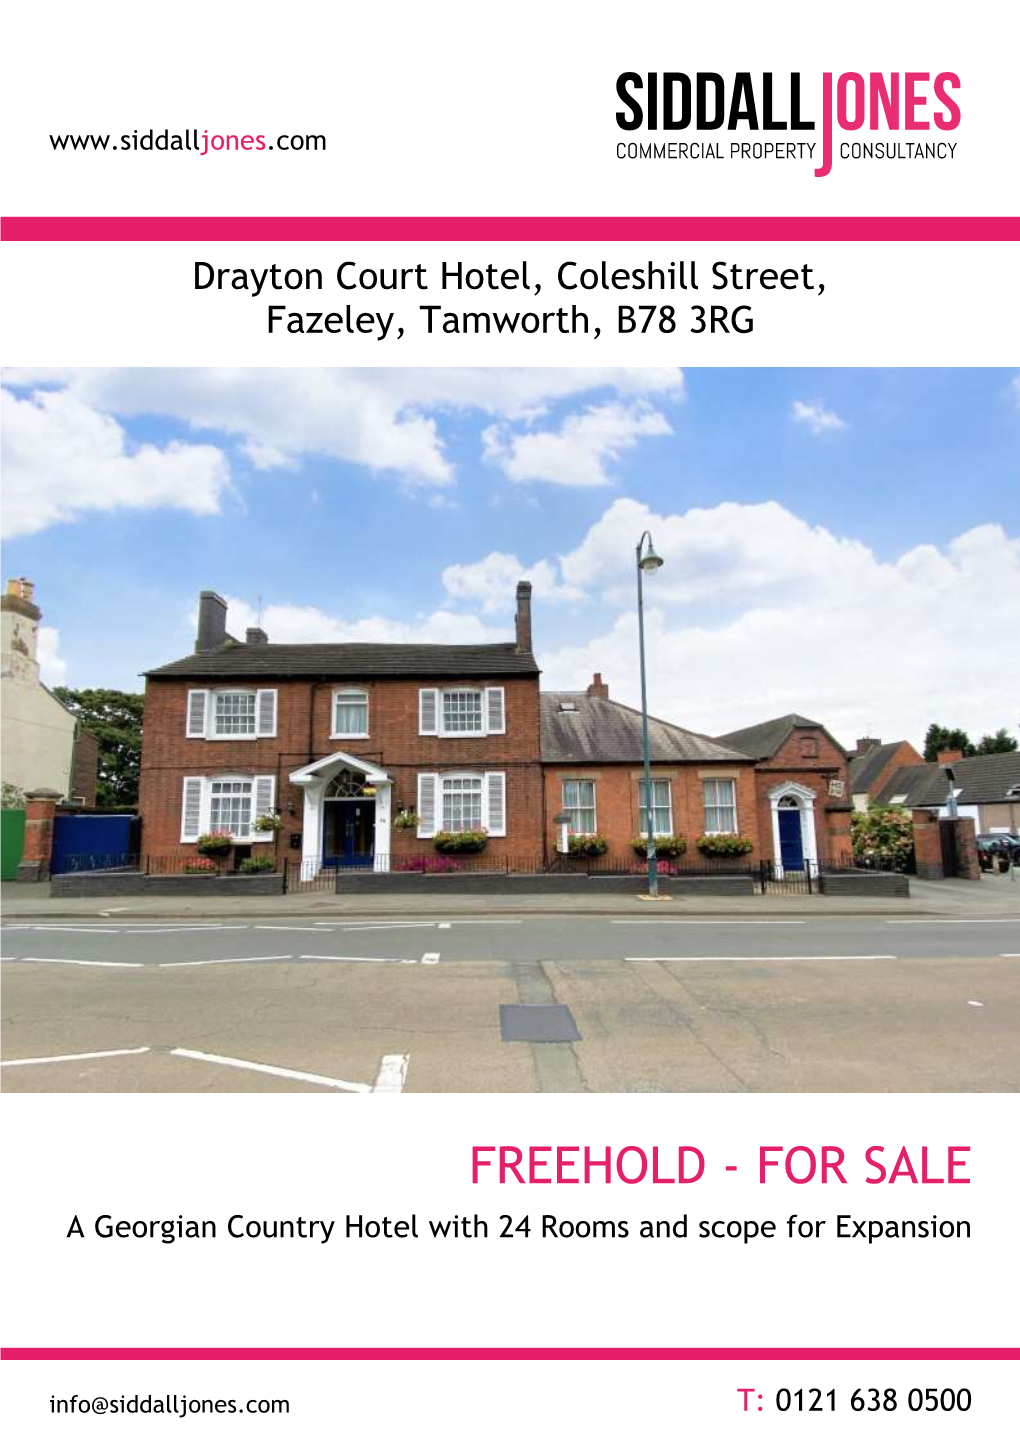 FREEHOLD - for SALE a Georgian Country Hotel with 24 Rooms and Scope for Expansion